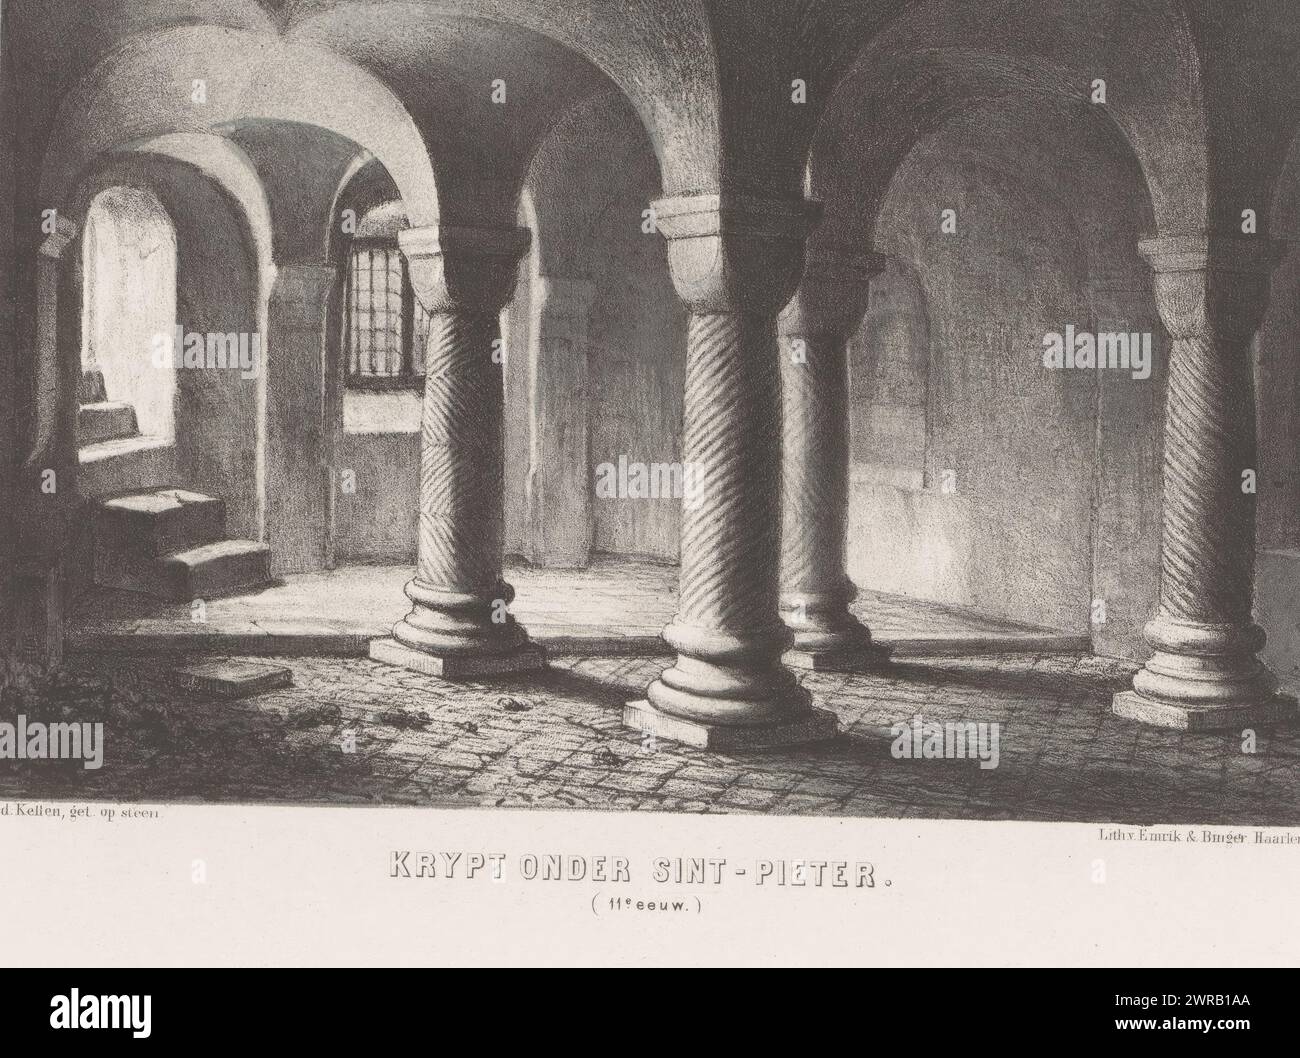 Crypt under a church, 11th century, Crypt under St. Peter. (11th century) (title on object), A crypt or burial vault under a church, here referred to as St. Peter's., print maker: David van der Kellen (1827-1895), printer: Emrik & Binger, Haarlem, 1857 - 1864, paper, height c. 292 mm × width c. 374 mm, print Stock Photo